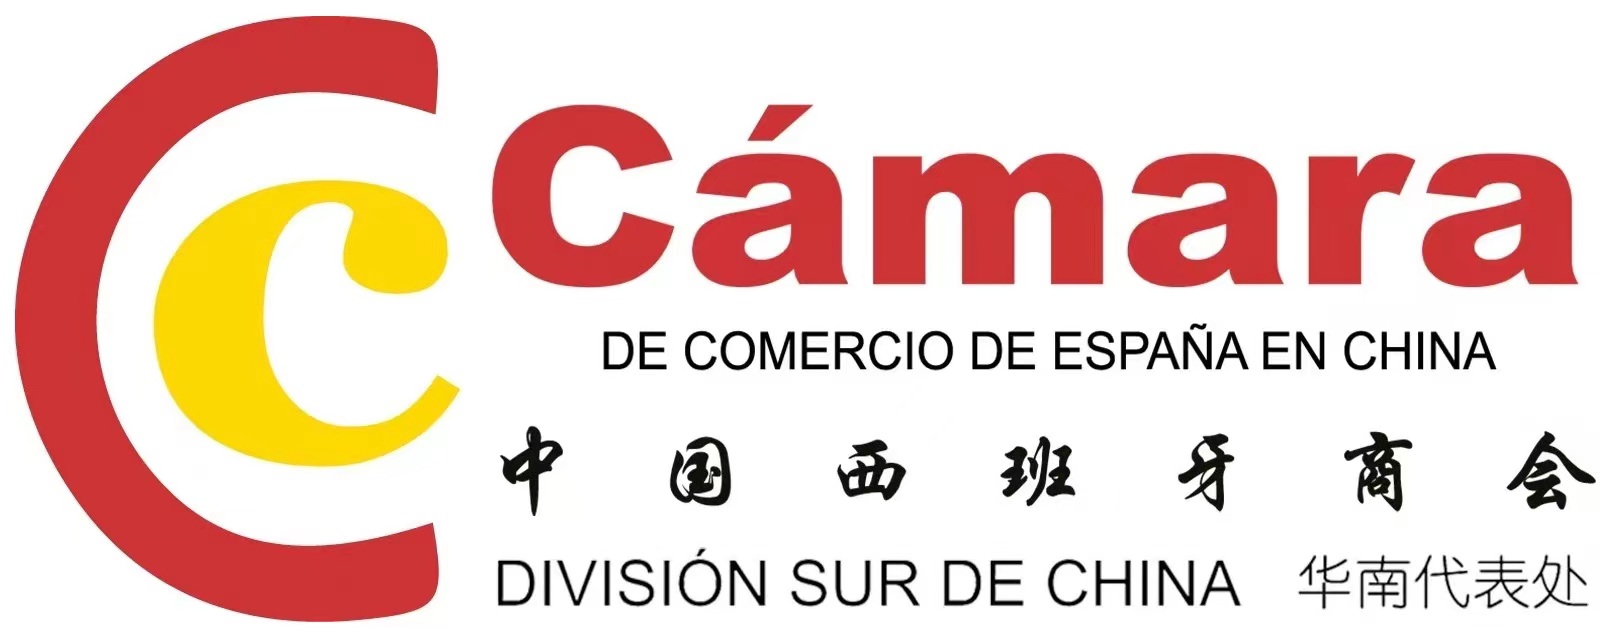 Featured image for “The Spanish Chamber of Commerce in China”